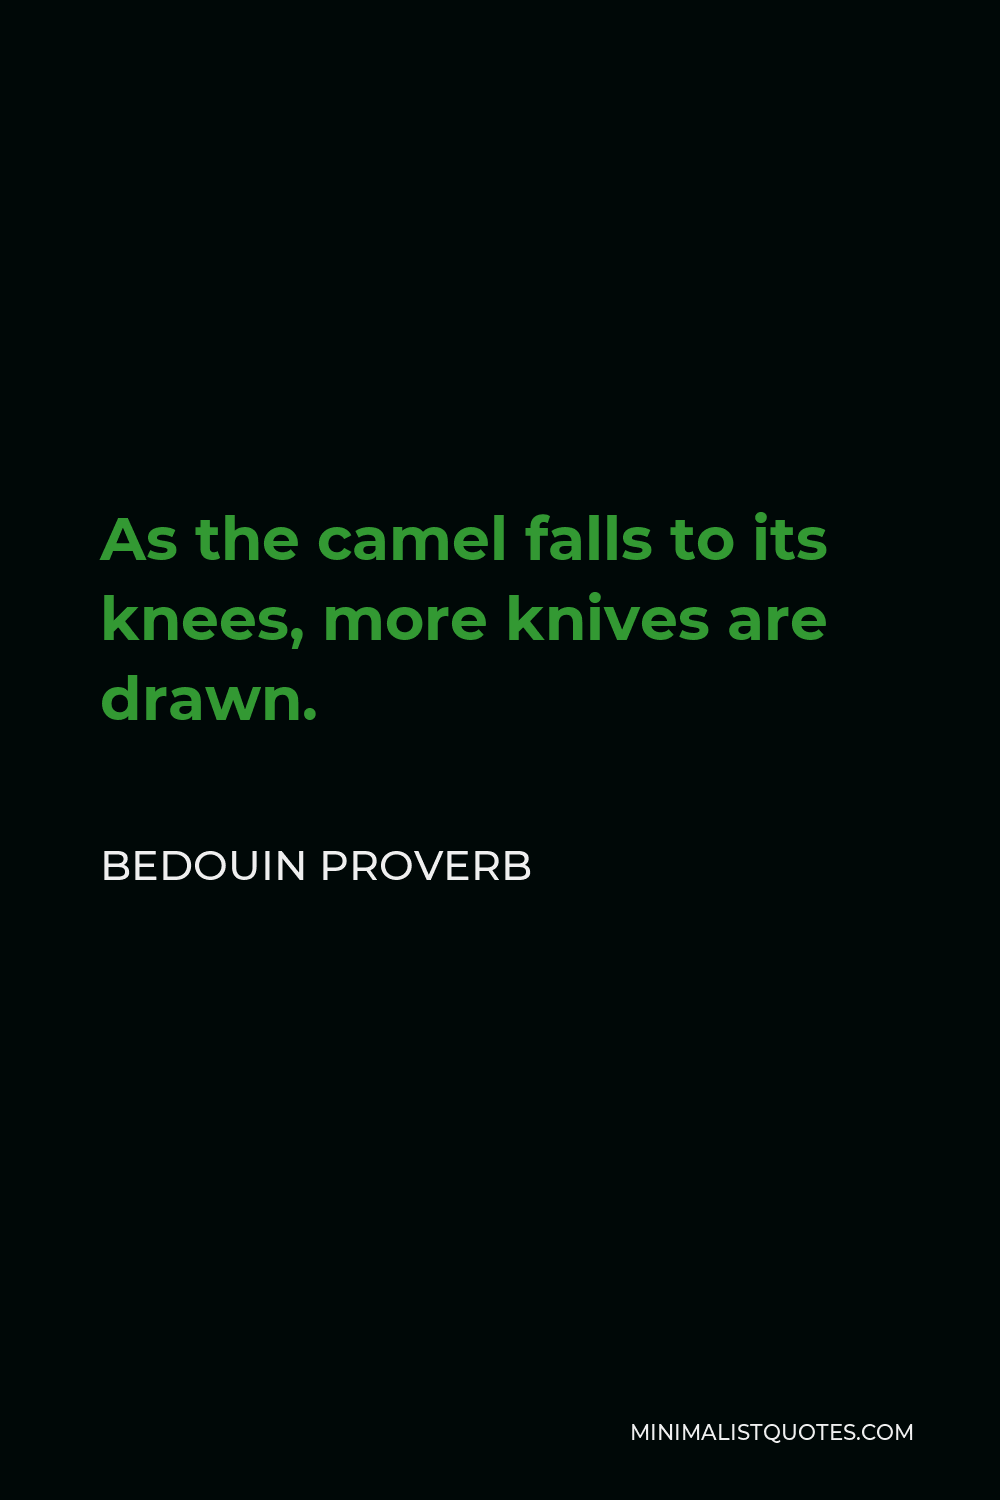 Bedouin Proverb Quote - As the camel falls to its knees, more knives are drawn.